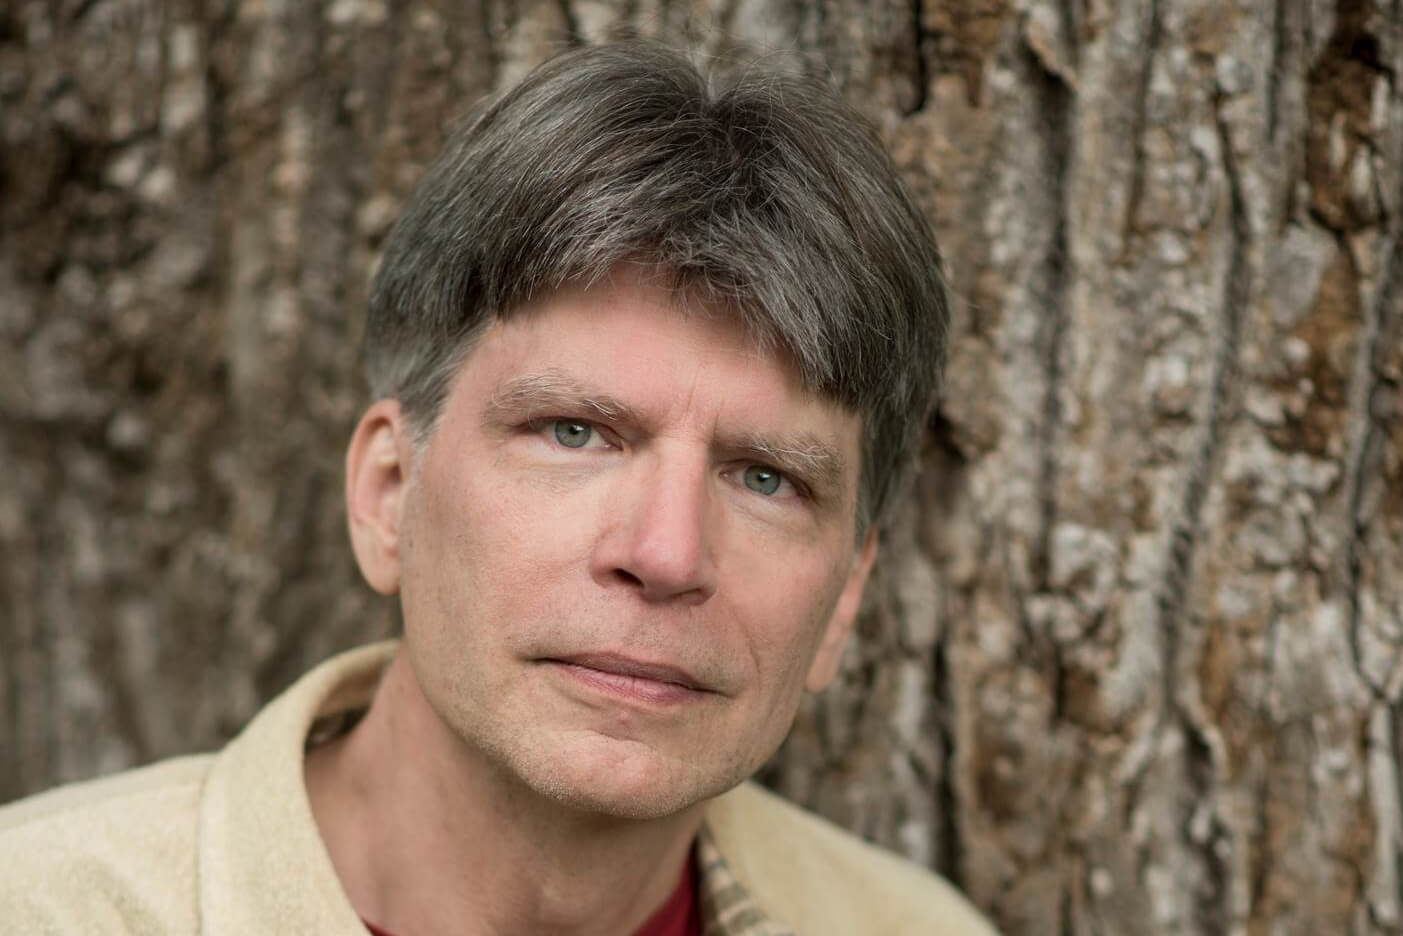 Richard Powers, photographed standing in front of a tree.